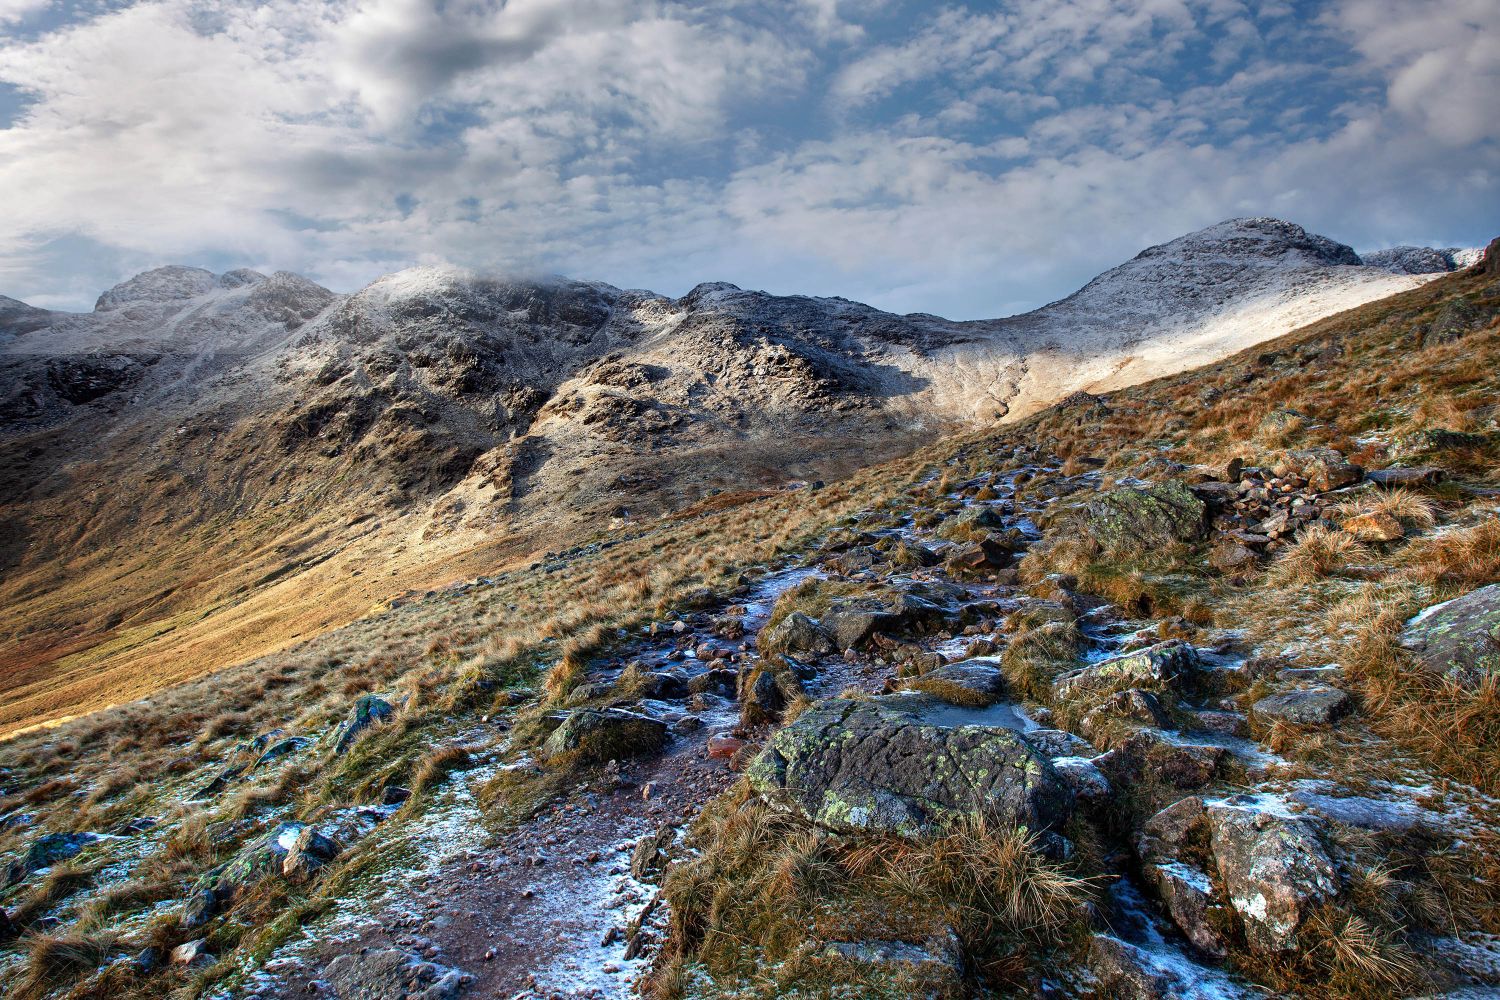 The path to Bowfell and Crinkle Crags by Martin Lawrence